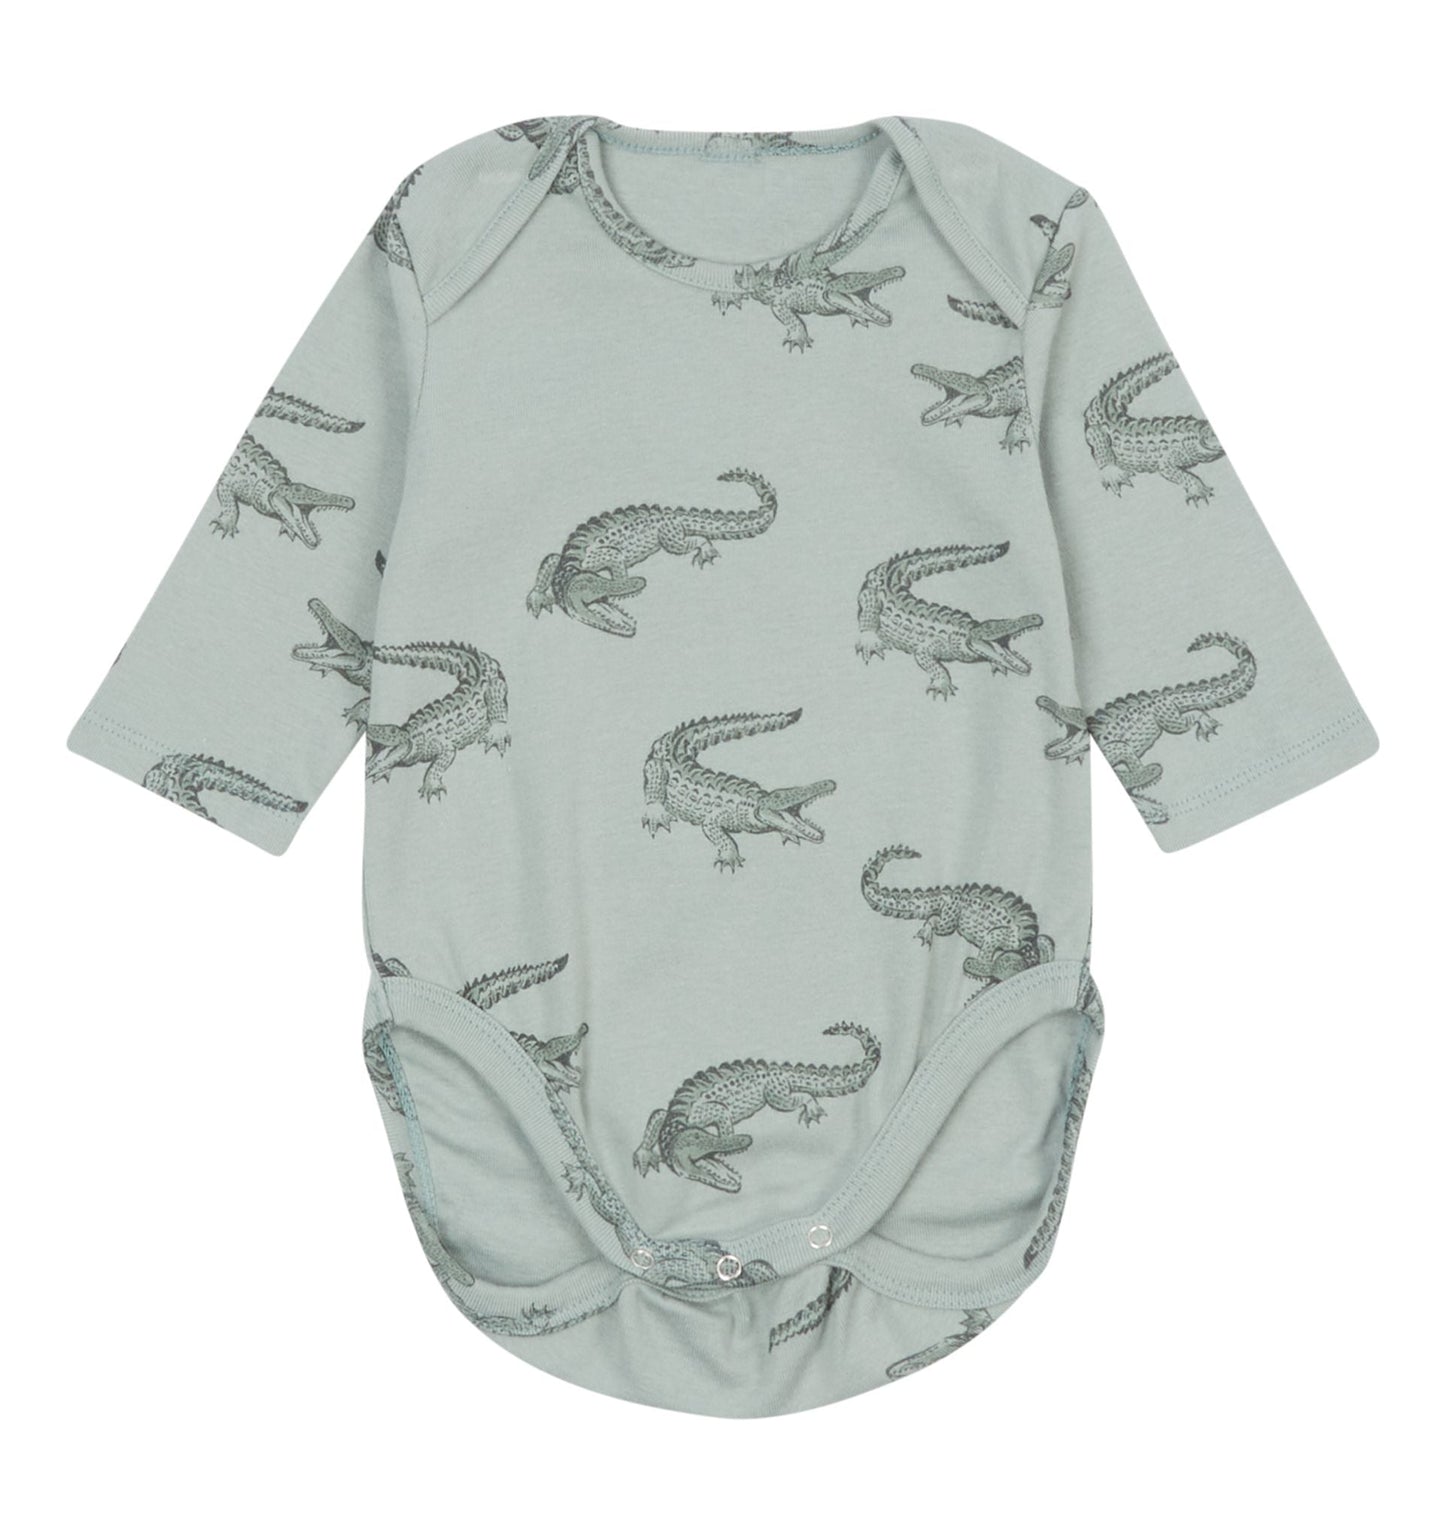 Load image into Gallery viewer, The sage green baby bodysuit with three quarter sleeves and crocodile outline print against a white background.
